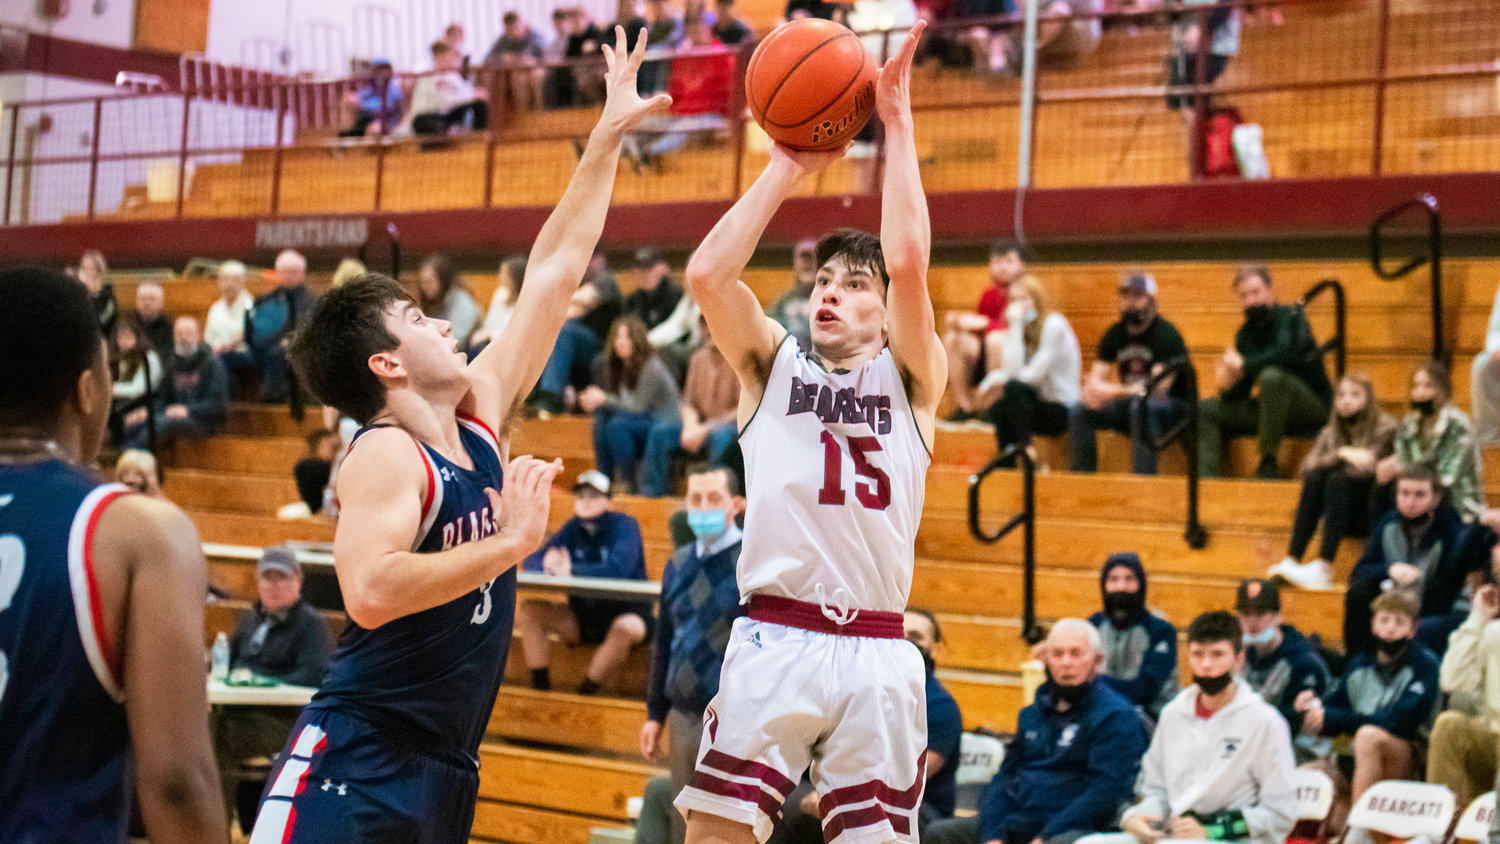 W.F. West’s Seth Hoff (15) looks to shoot over defenders Thursday night during a game.